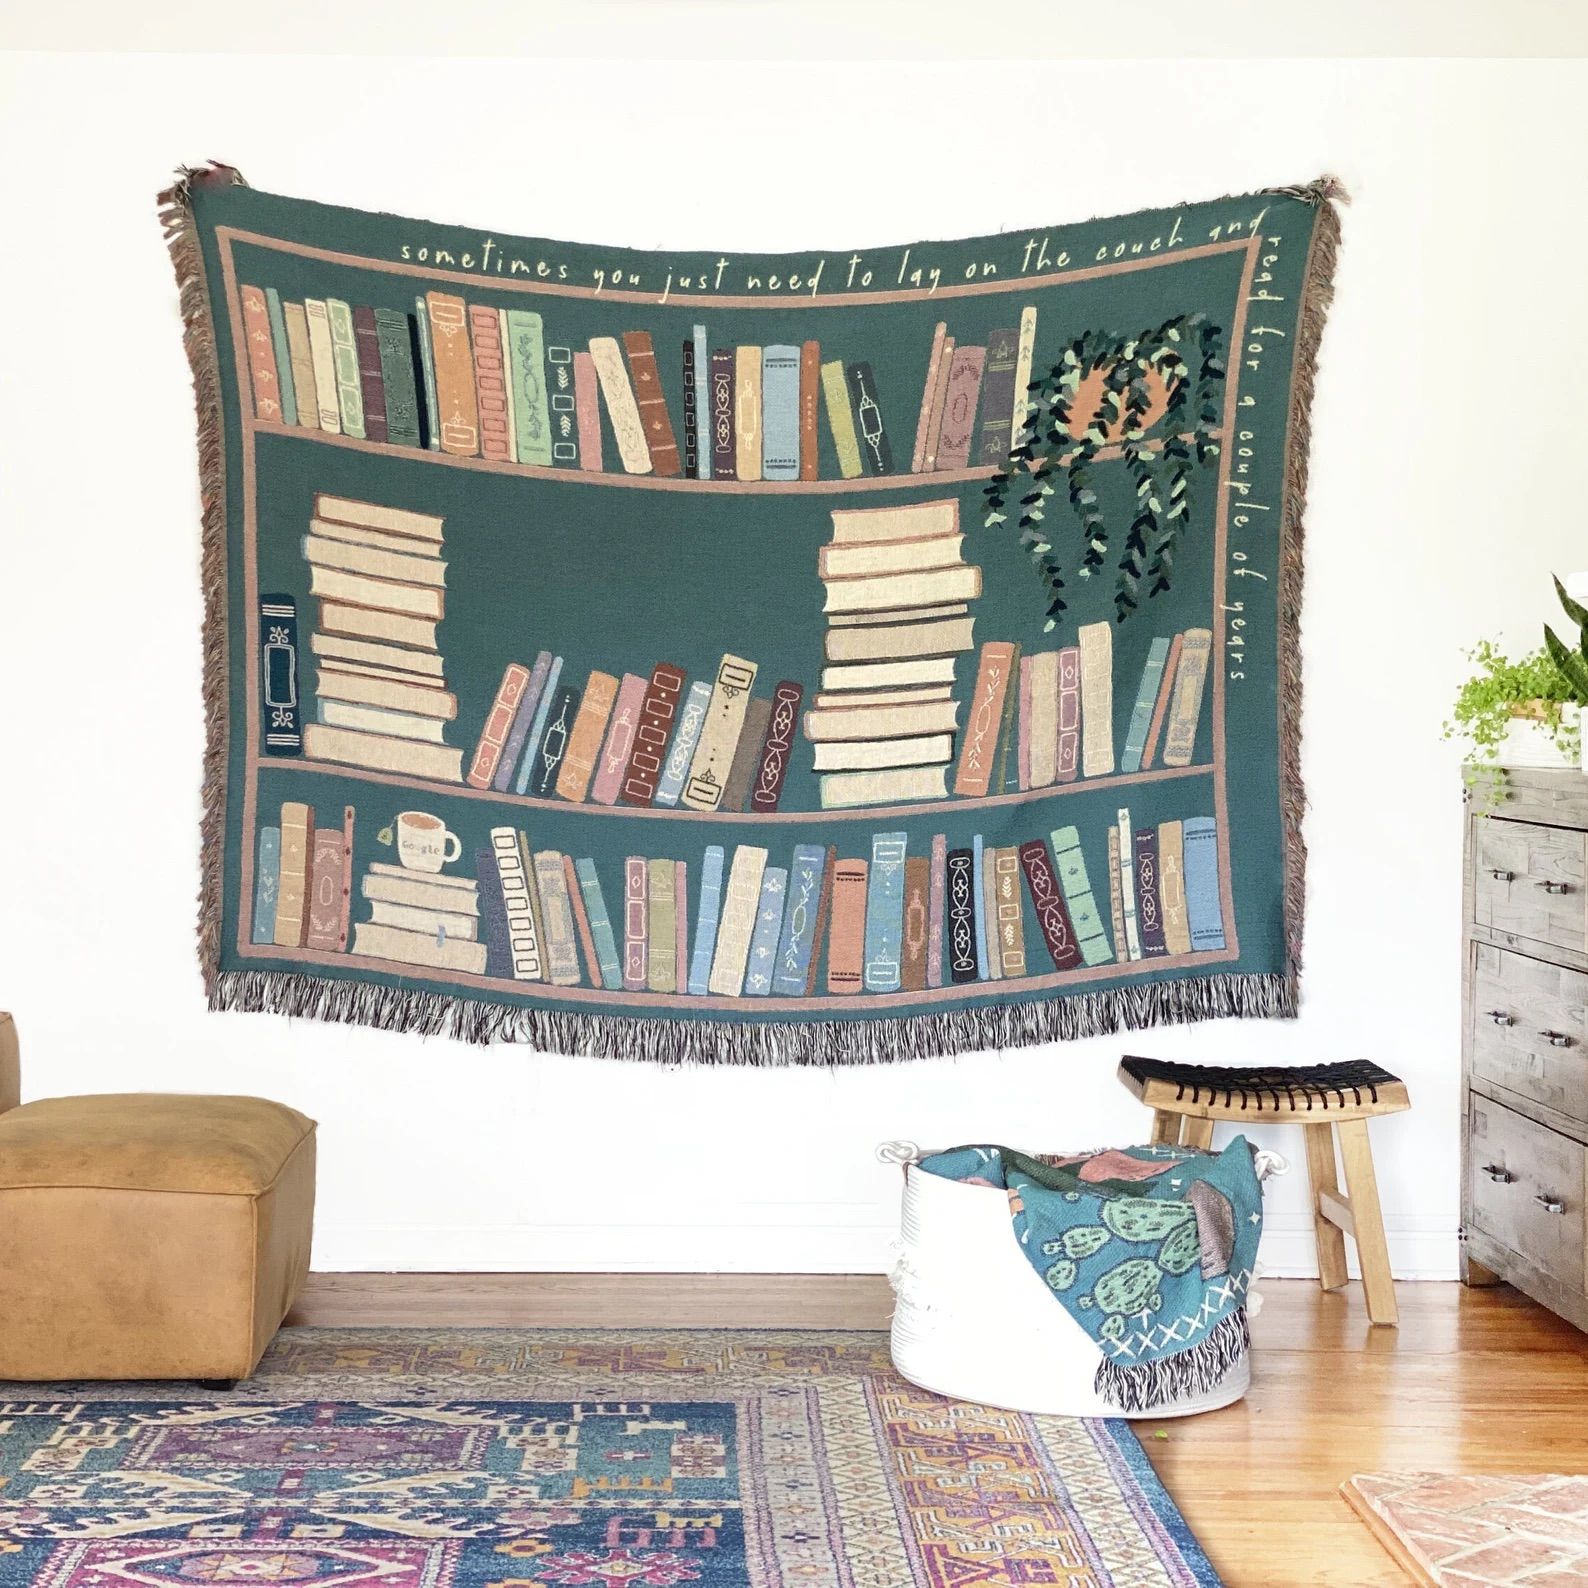 Book Lover Throw Blanket hung on a white wall in front of a couch, basket, and side table.